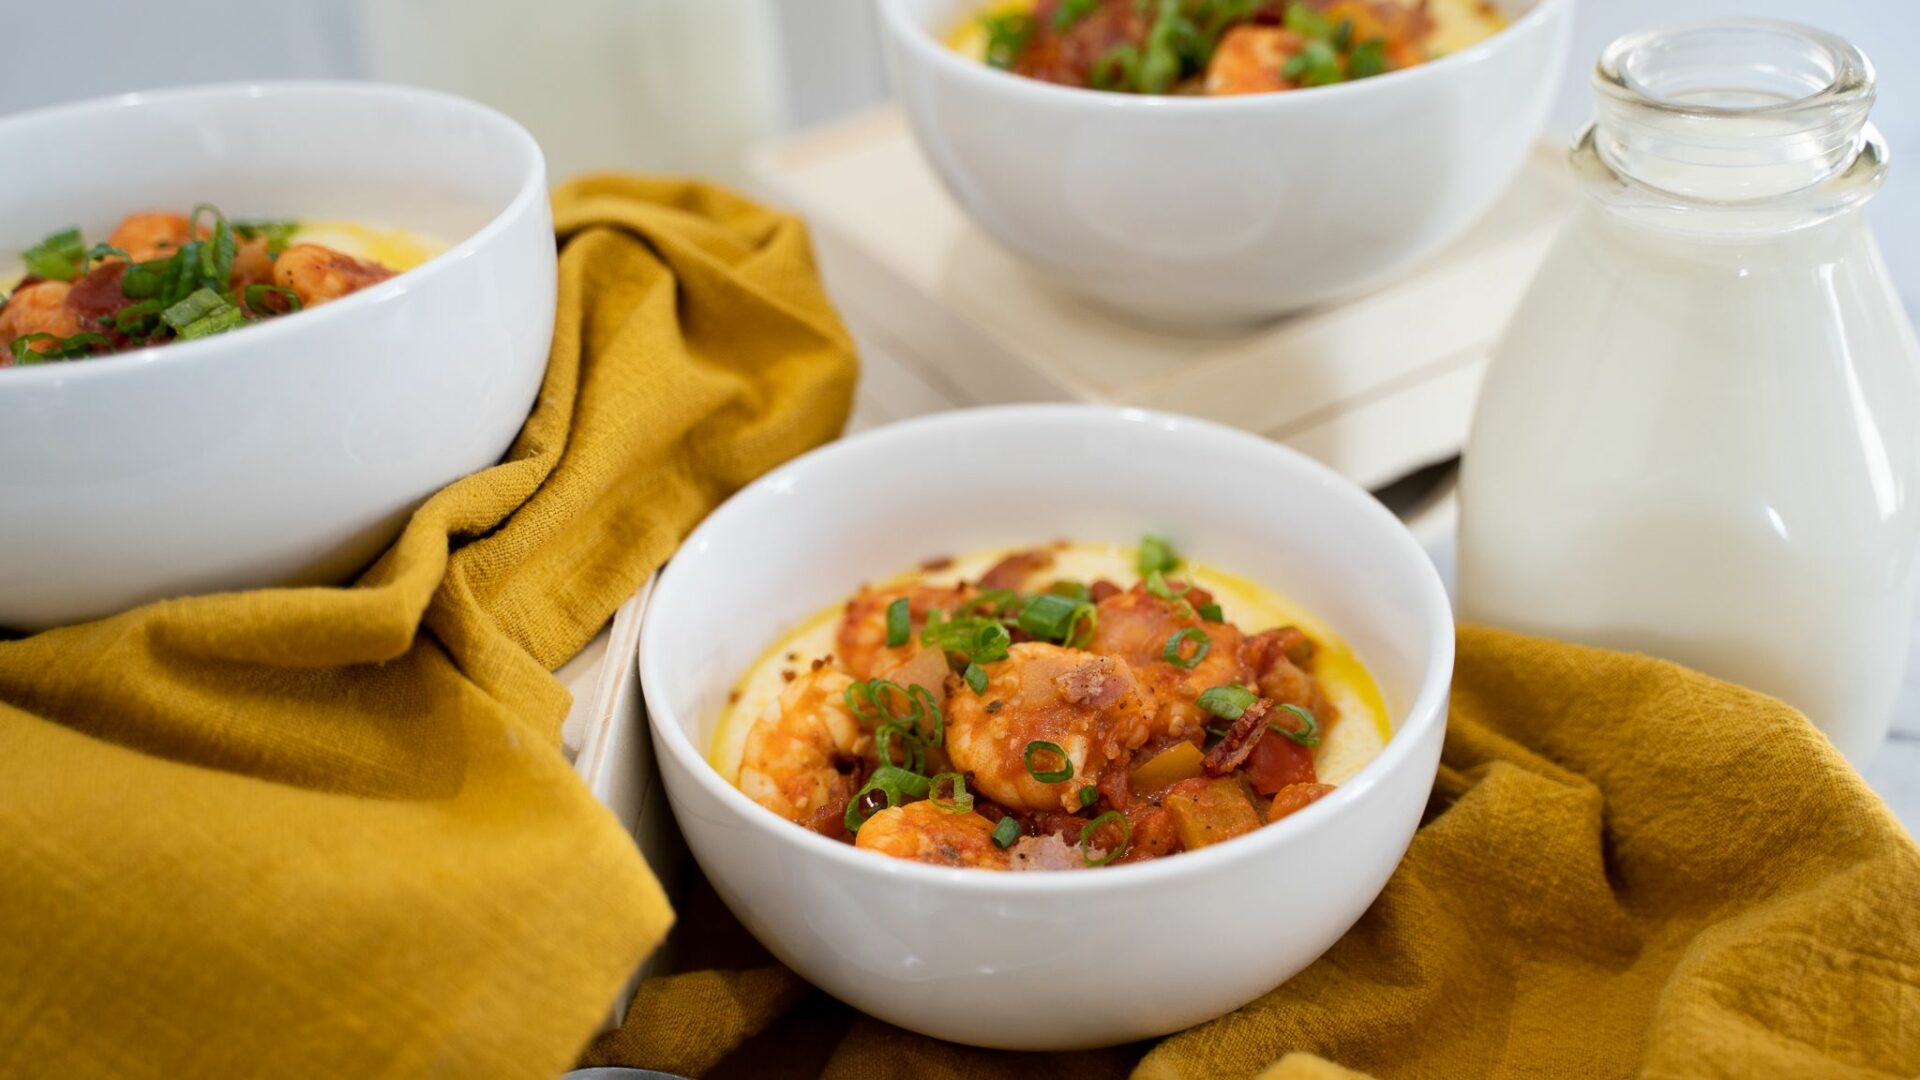 shrimp and grits in a white bowl on yellow table cloth